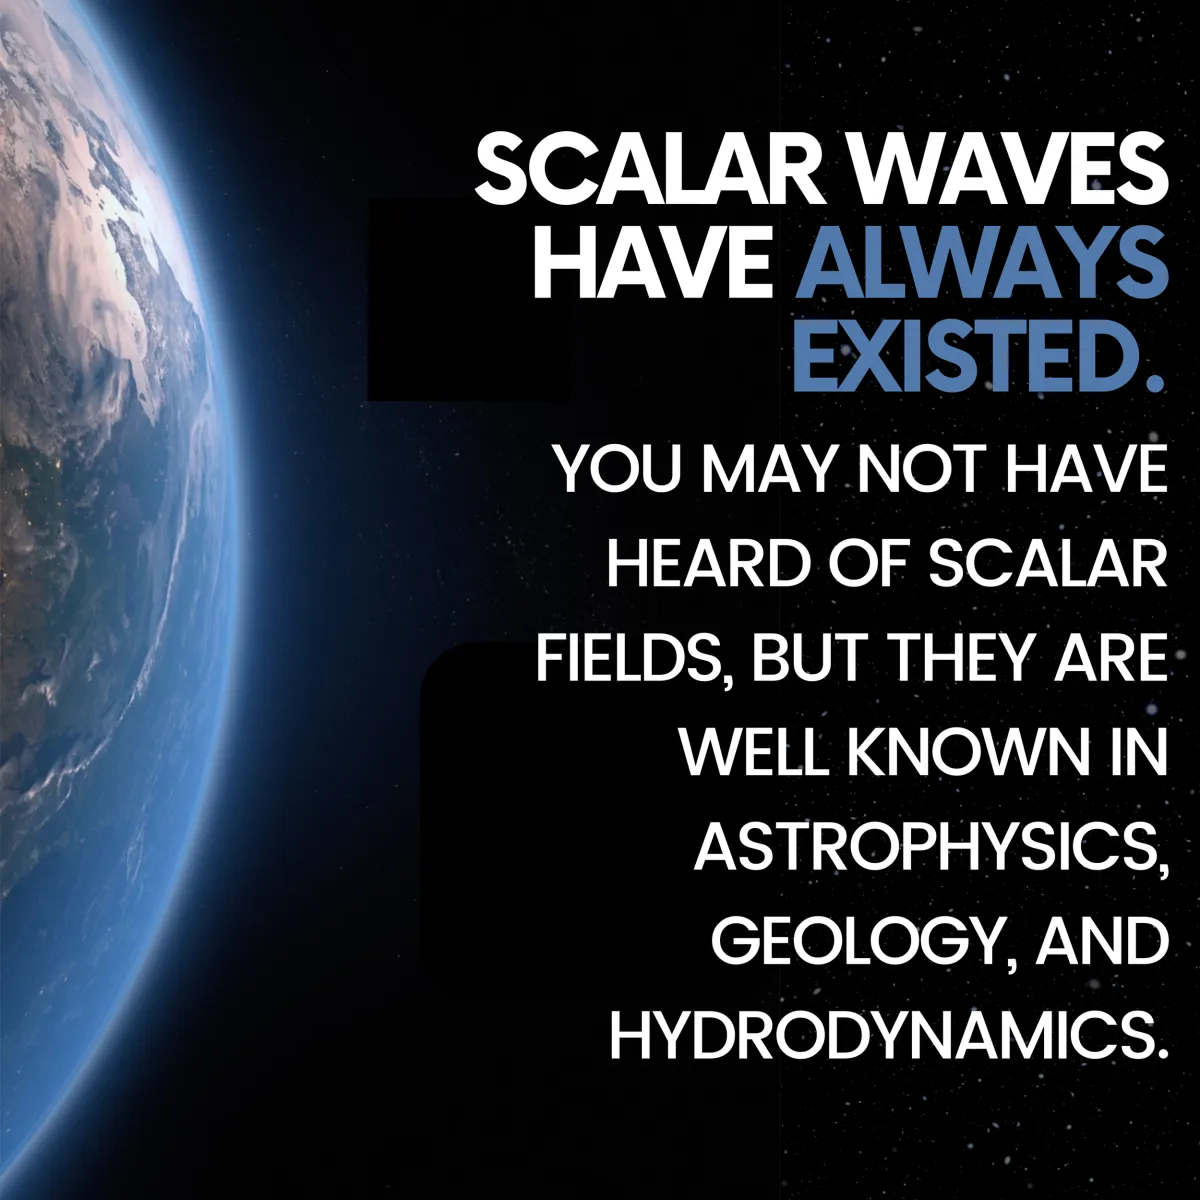 scalar waves have always existed. you may not have heard of scalar fields, but they are well known in astrophysics, geology, and hydrodynamics.